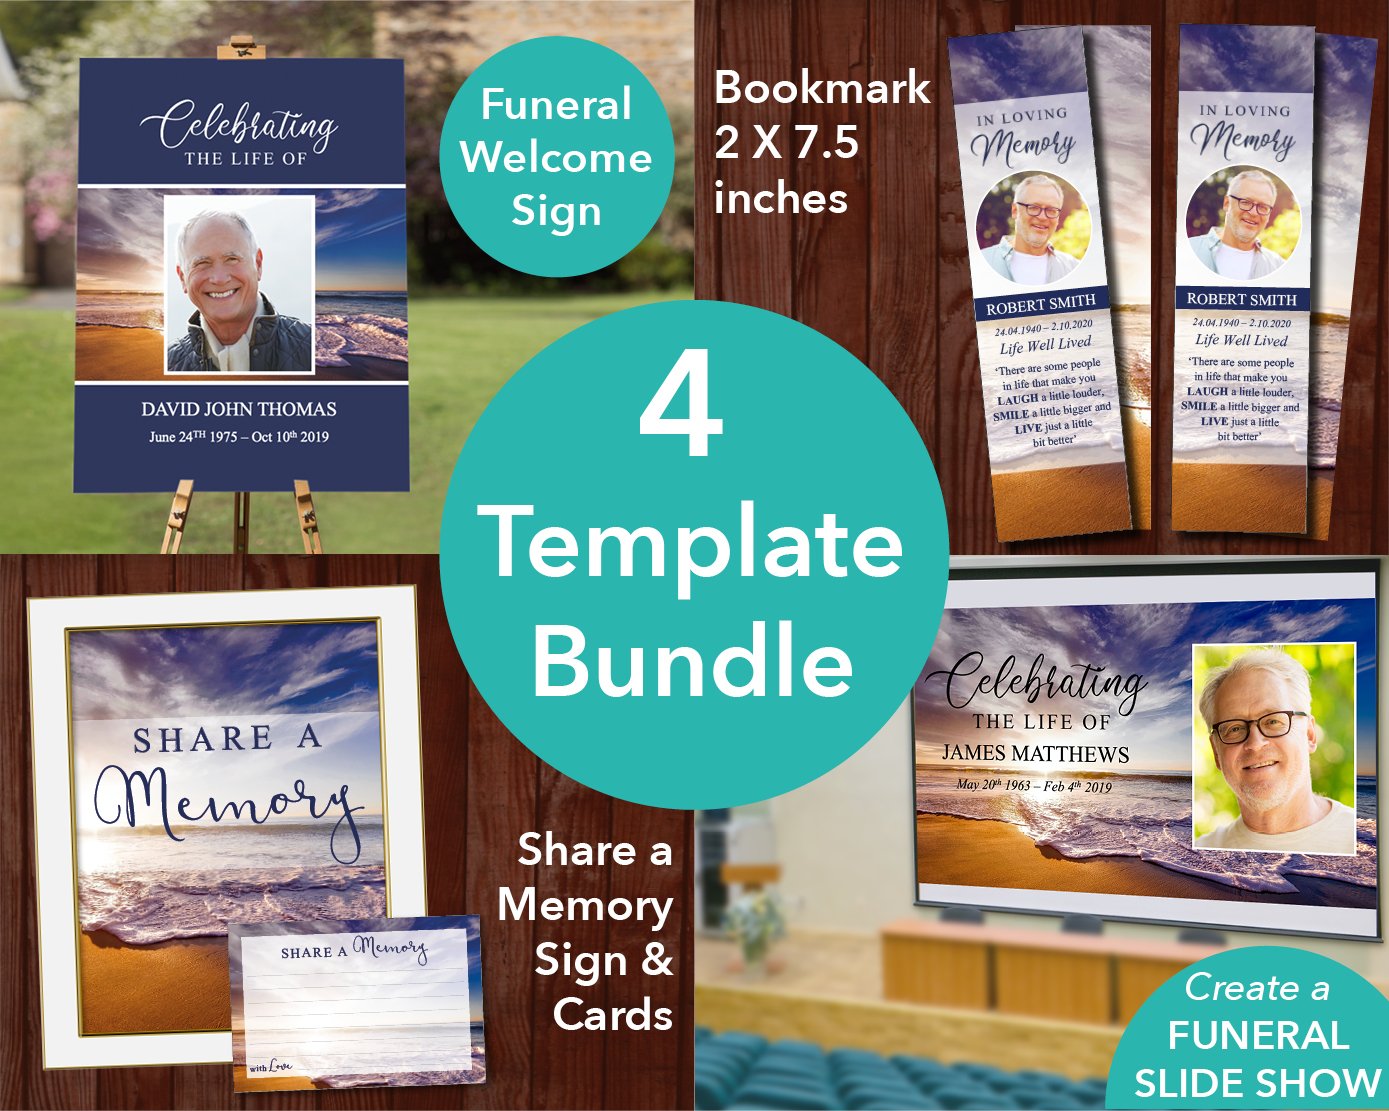 Waves Funeral Welcome Sign + Slide Show, Bookmark, Share a Memory Sign & Cards